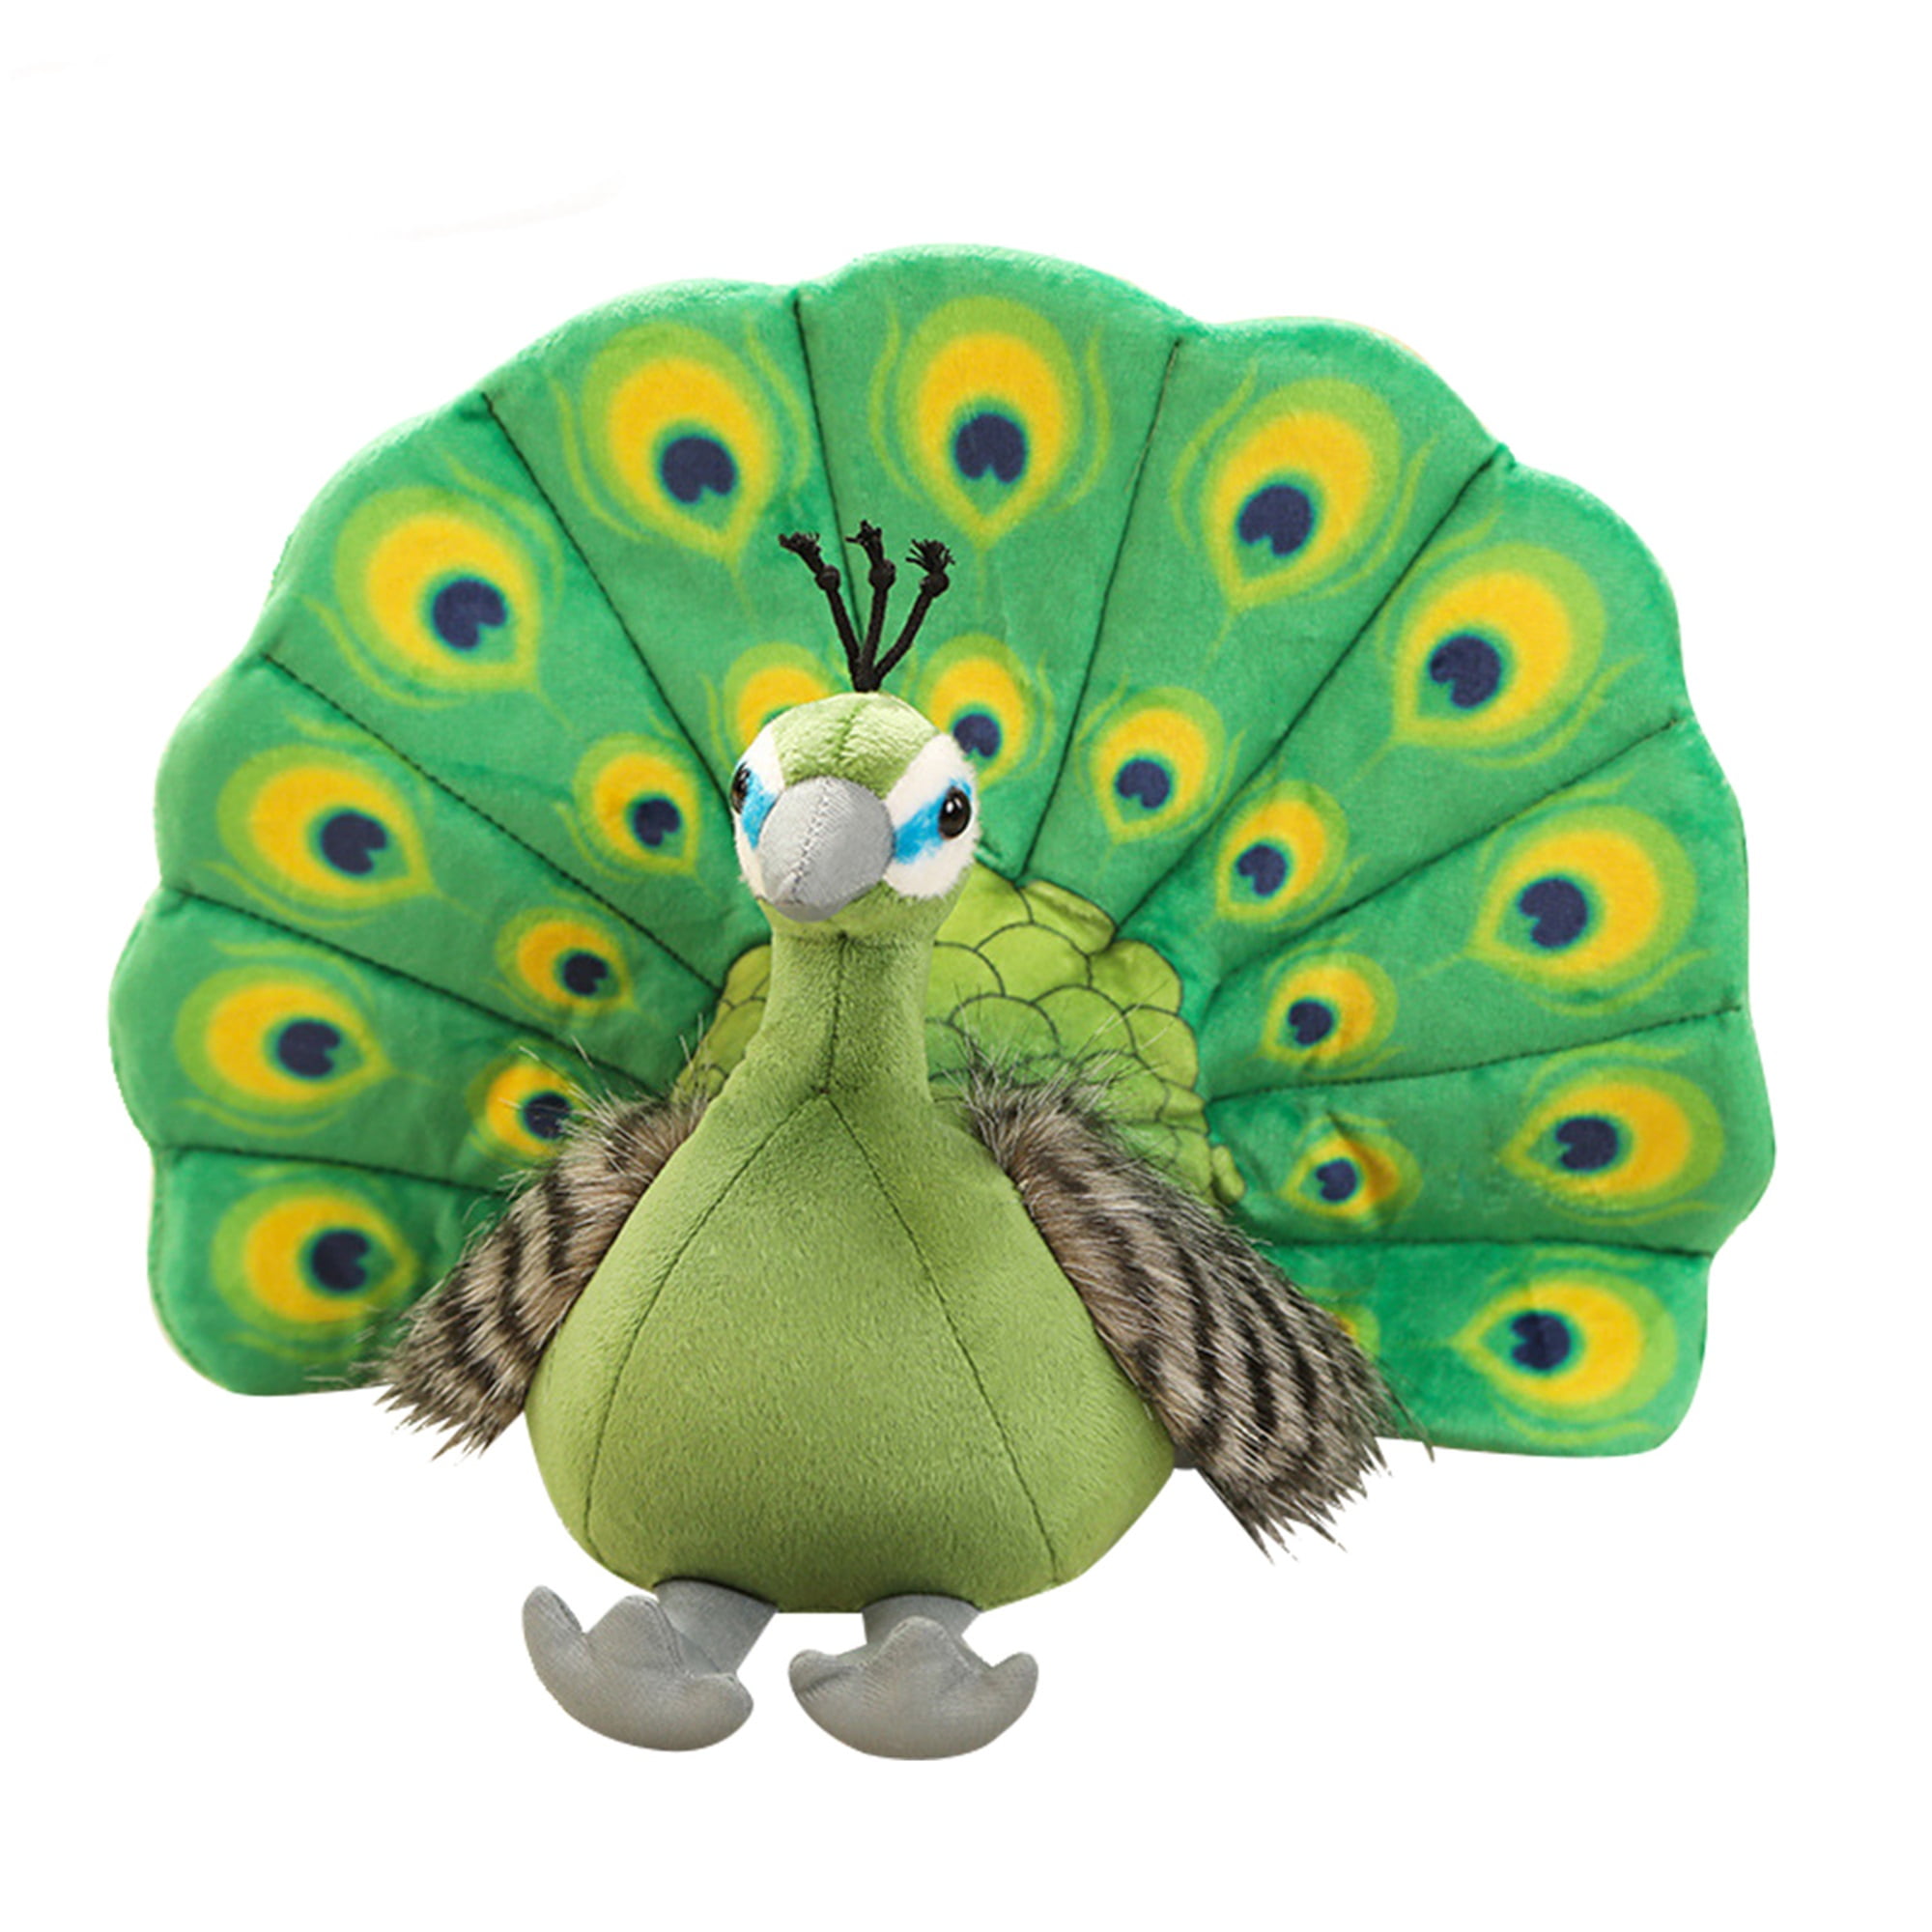 Simulation Plastic Animal Figures Model Peacock Toy Doll for Friends Gifts 